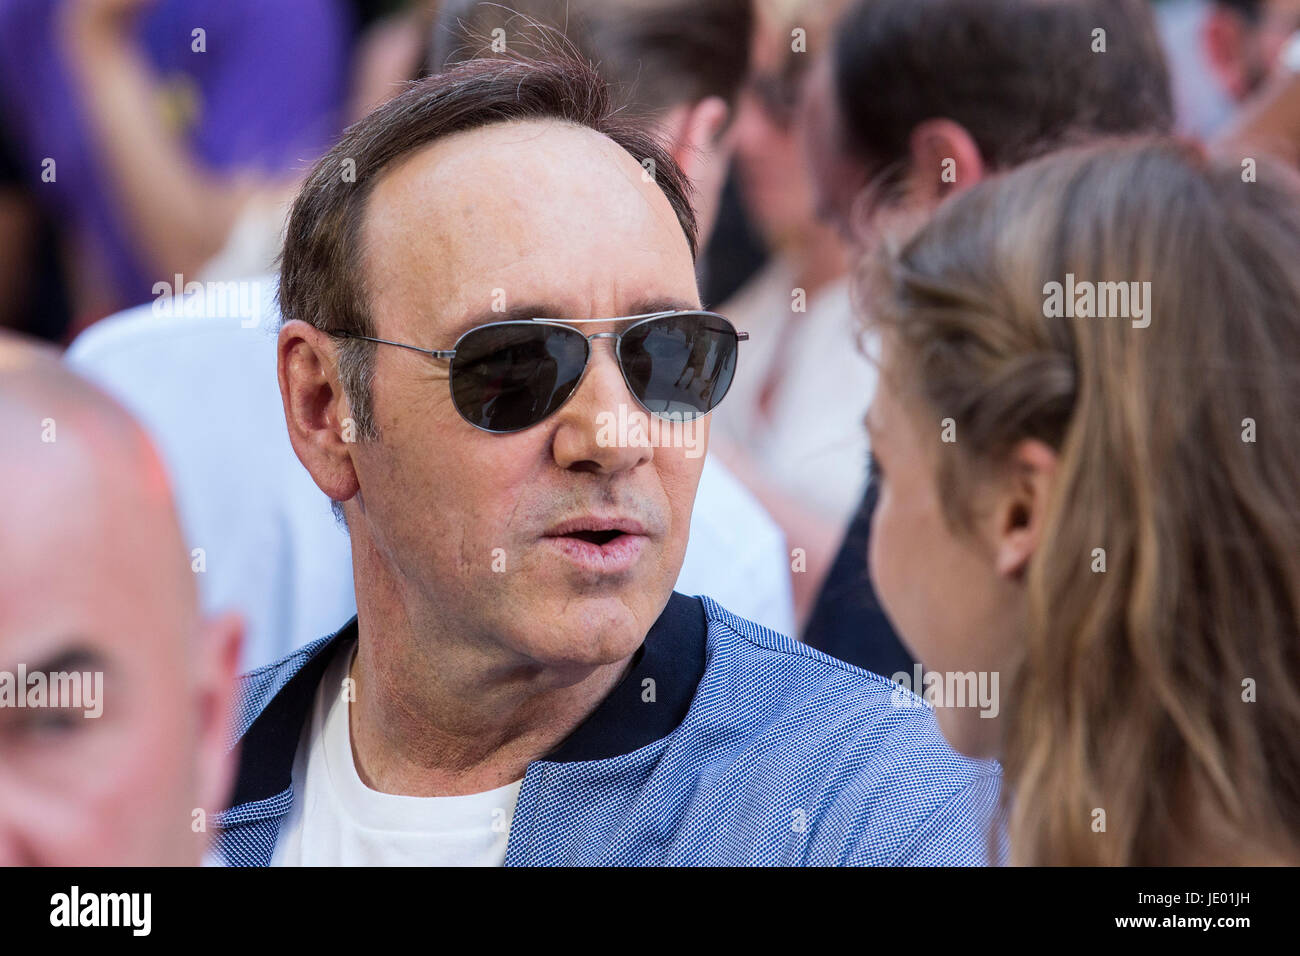 London, UK. 21st June, 2017. Actor Kevin Spacey arrives for the European Premiere of Baby Driver directed by Edgar Wright. Credit: Bettina Strenske/Alamy Live News Stock Photo